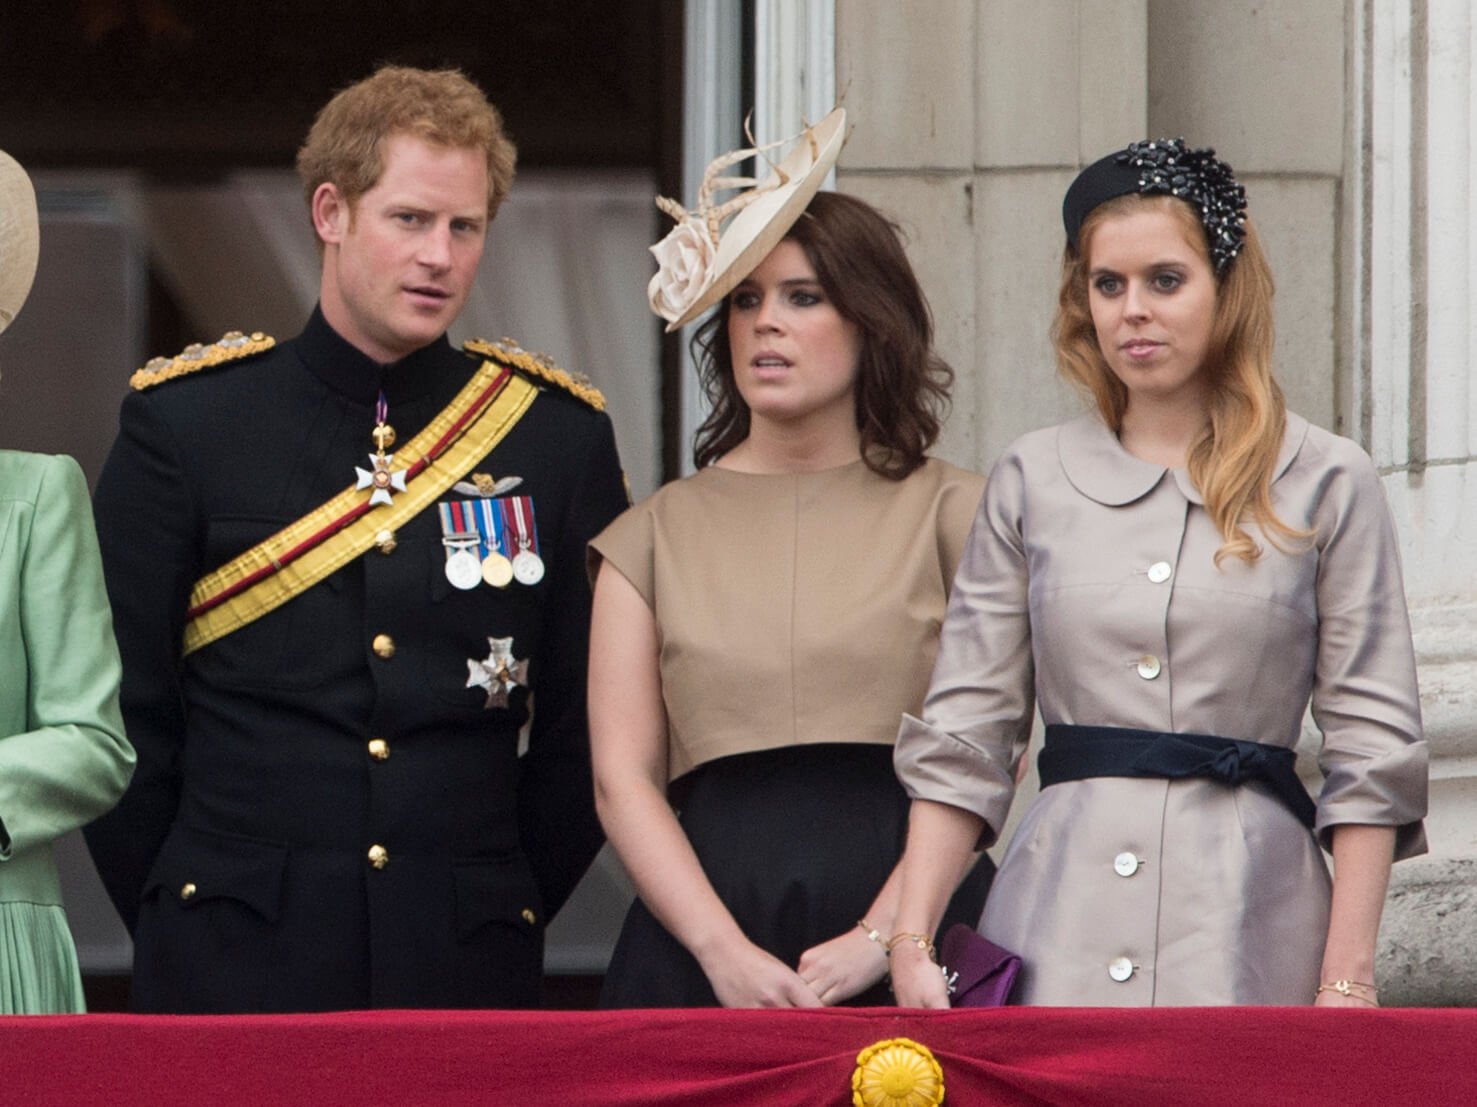 Prince Harry, Princess Eugenie, and Princess Beatrice of the royal family standing next to each other